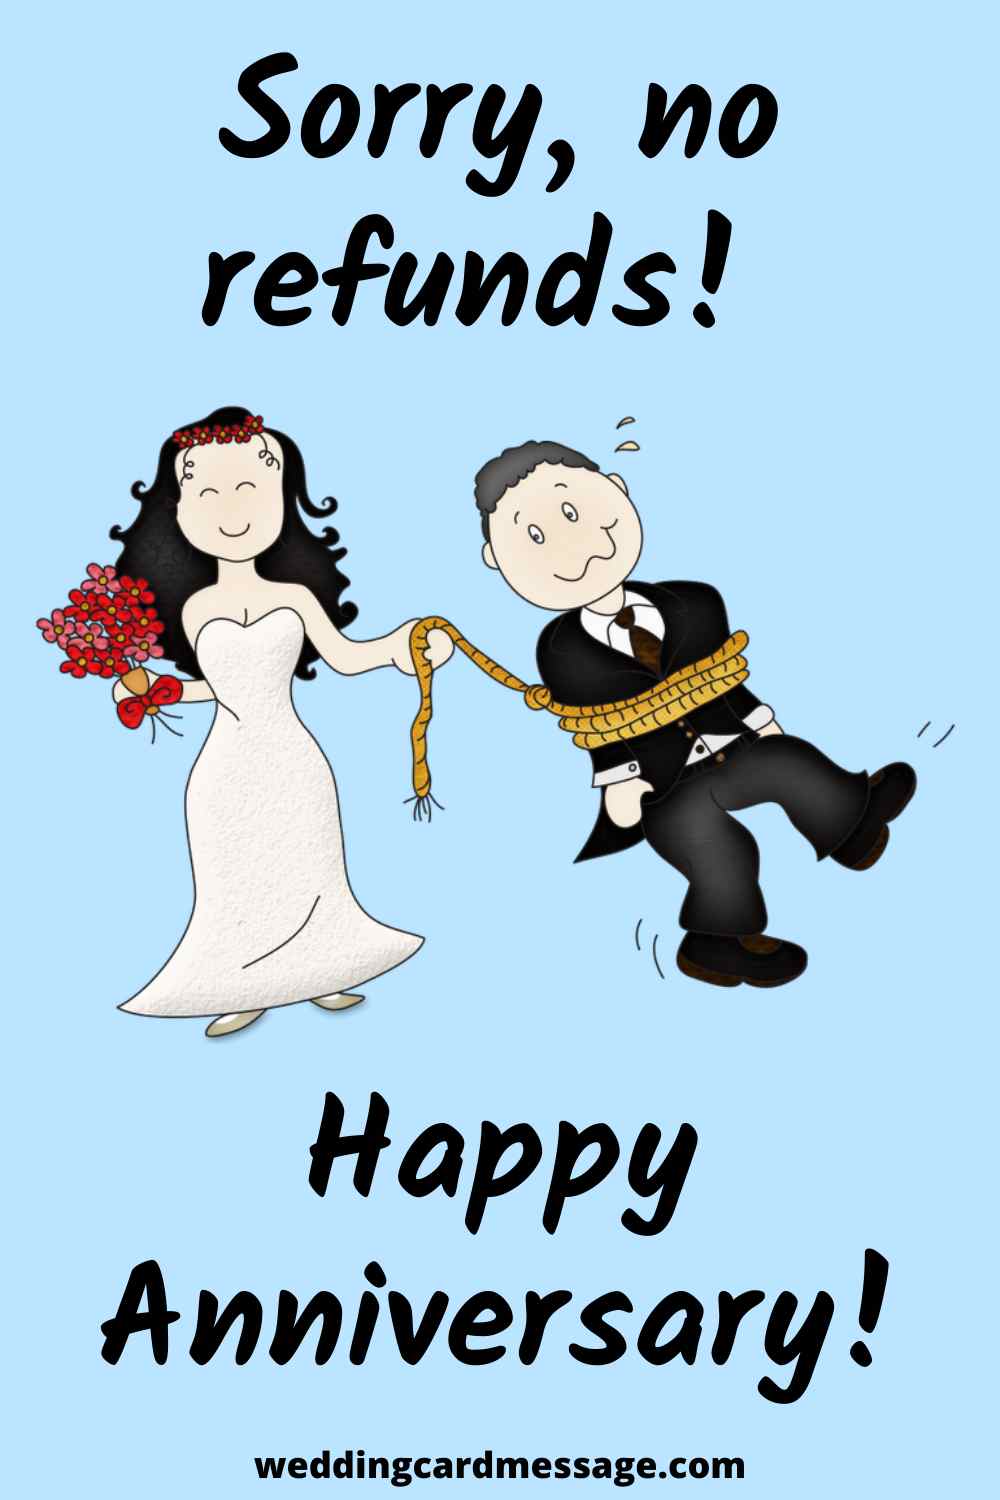 53 Funny Wedding Anniversary Quotes and Sayings - Wedding Card Message